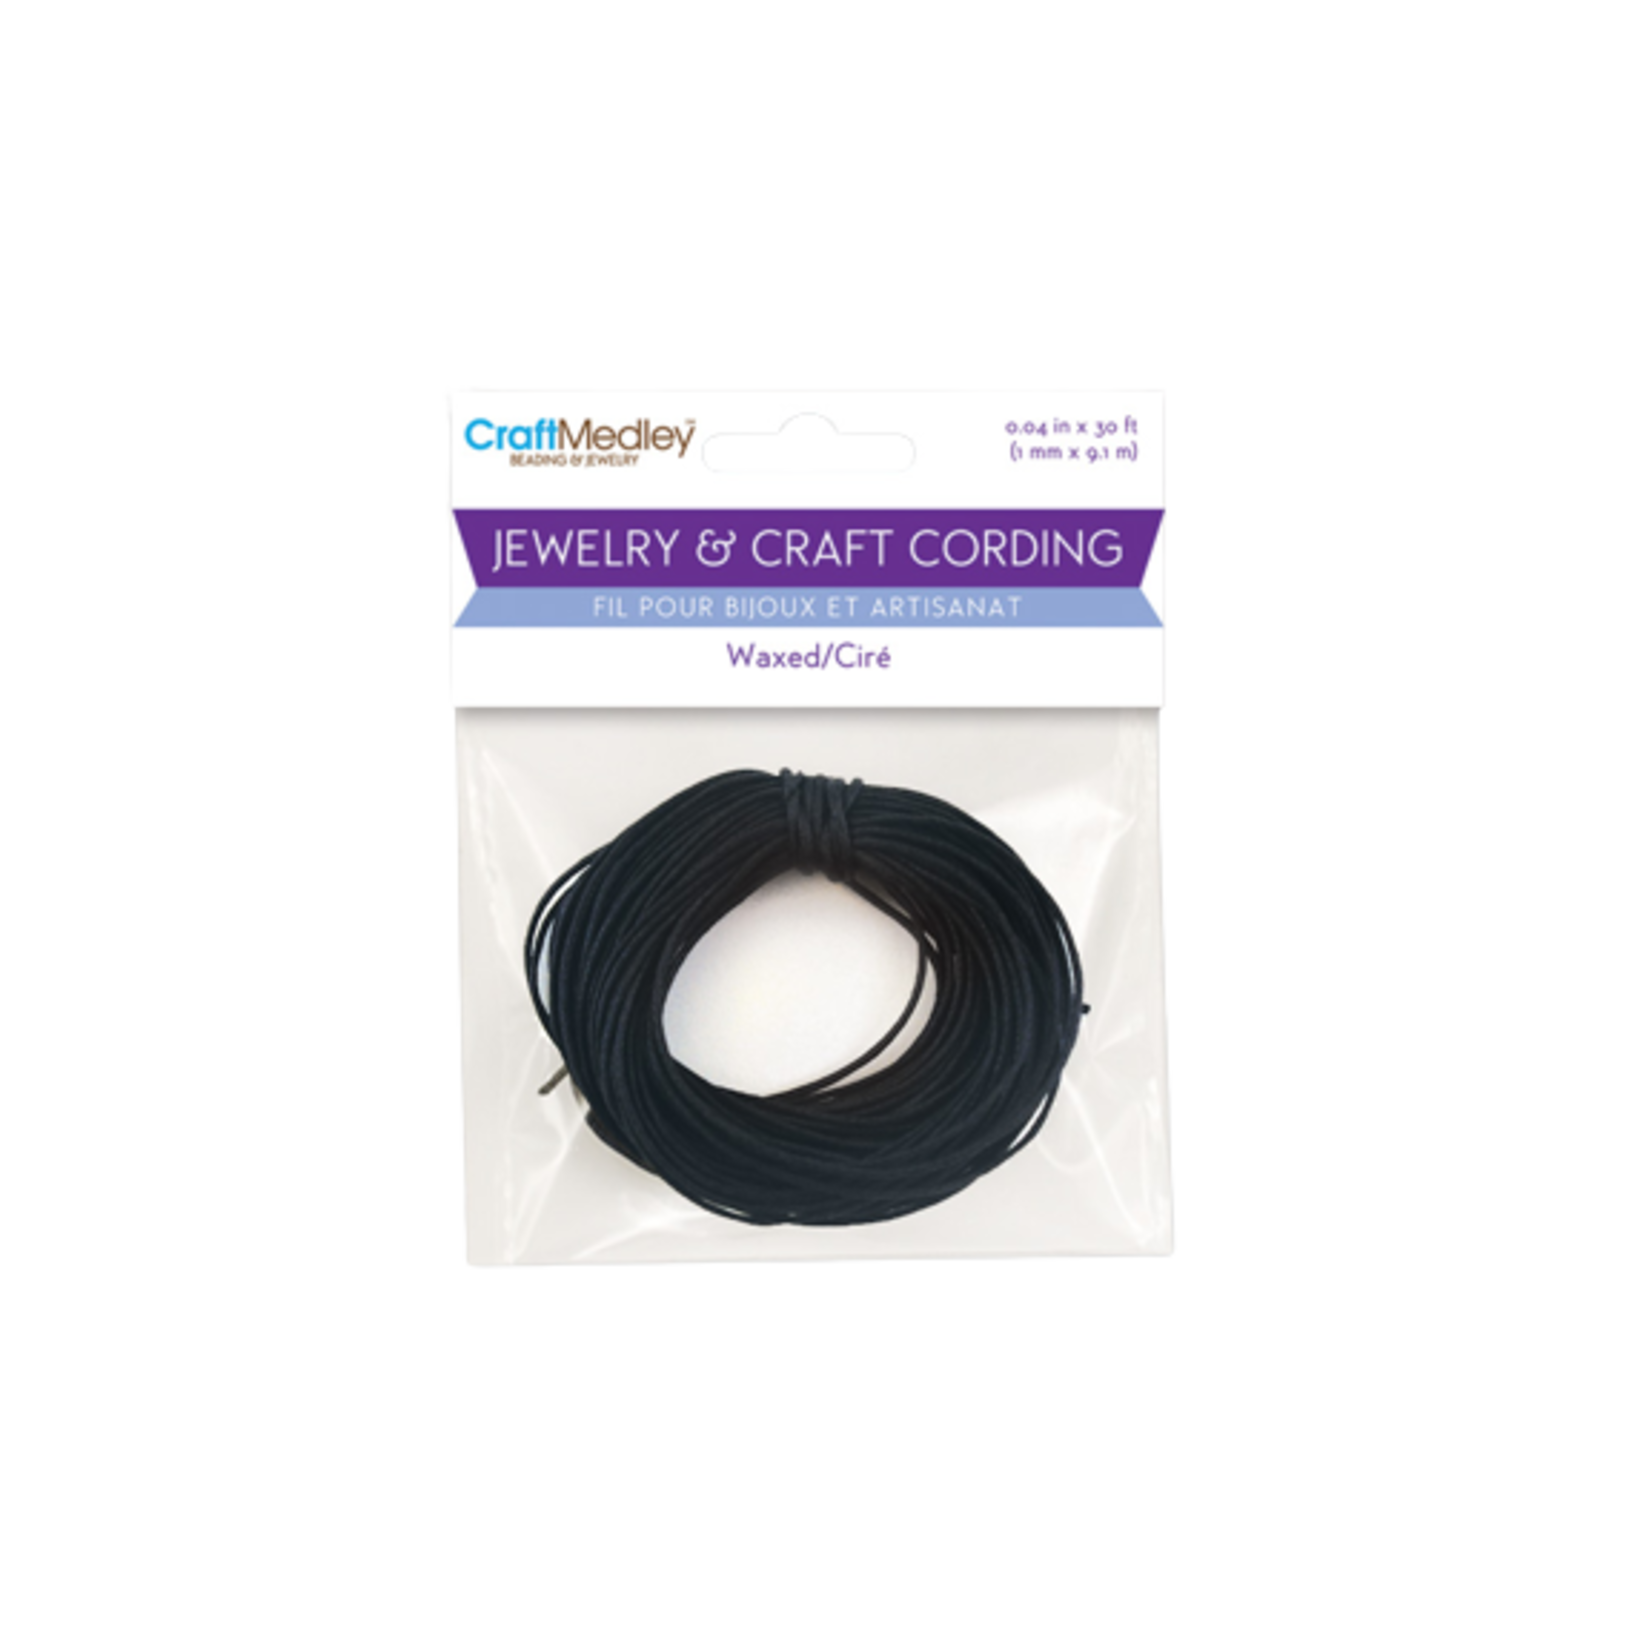 JEWELRY/CRAFT CORD: 1MM X 10YDS WAXED CORD ROUND A) BLACK